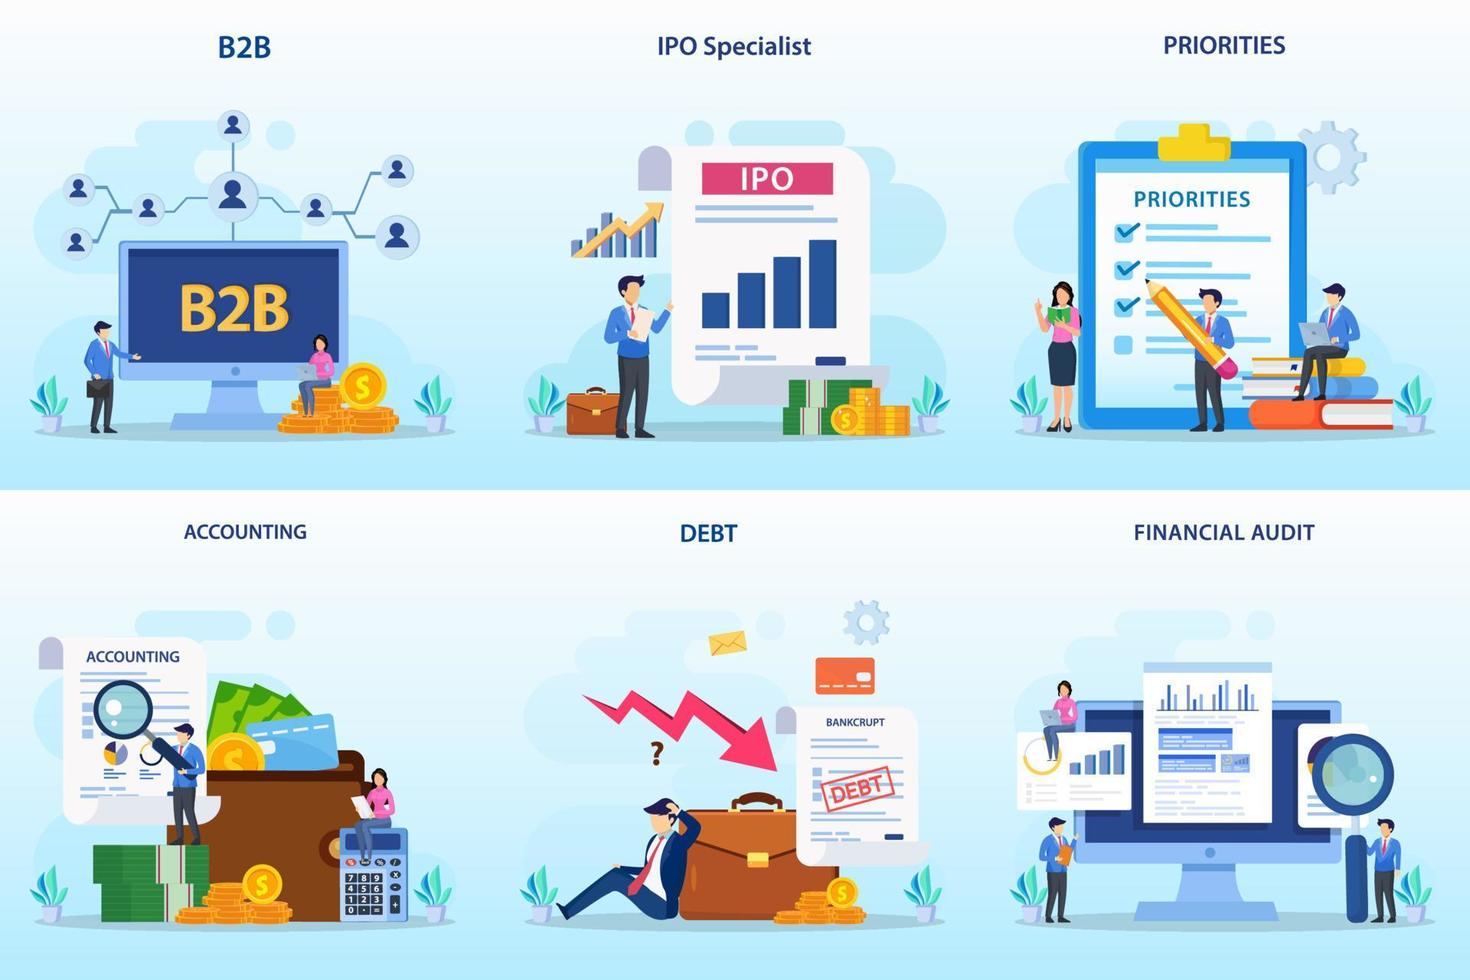 Set bundle Business concept. b2b, ipo specialist, priorities, accounting, debt, financial audit vector